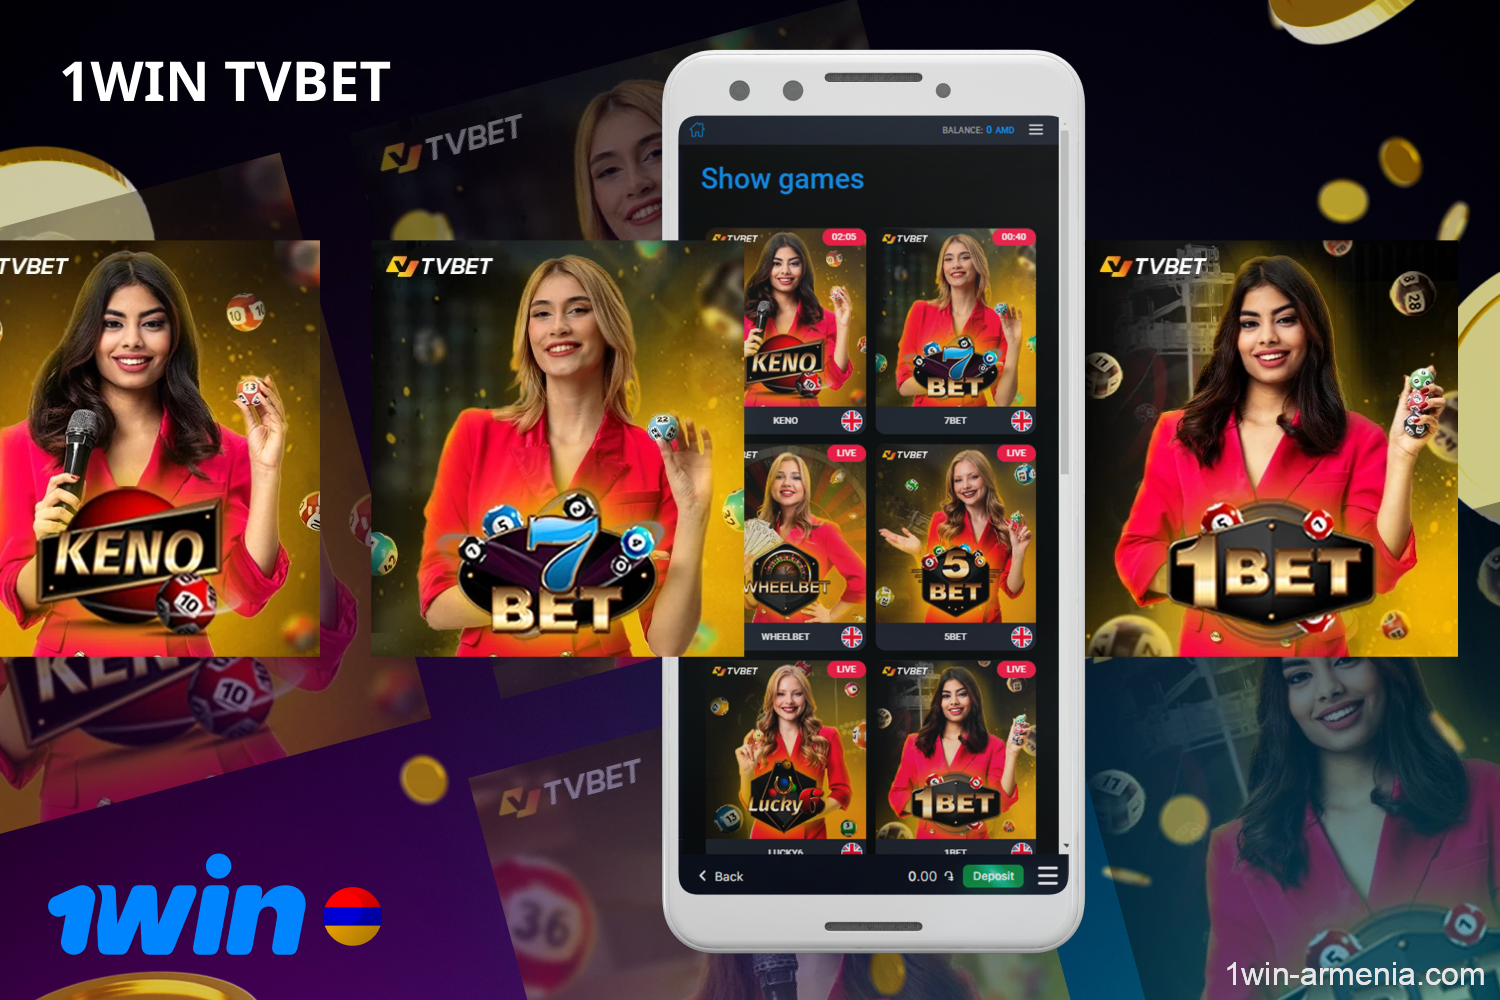 The official website of 1win TVBet offers exclusive live broadcasts and table games for residents of Armenia